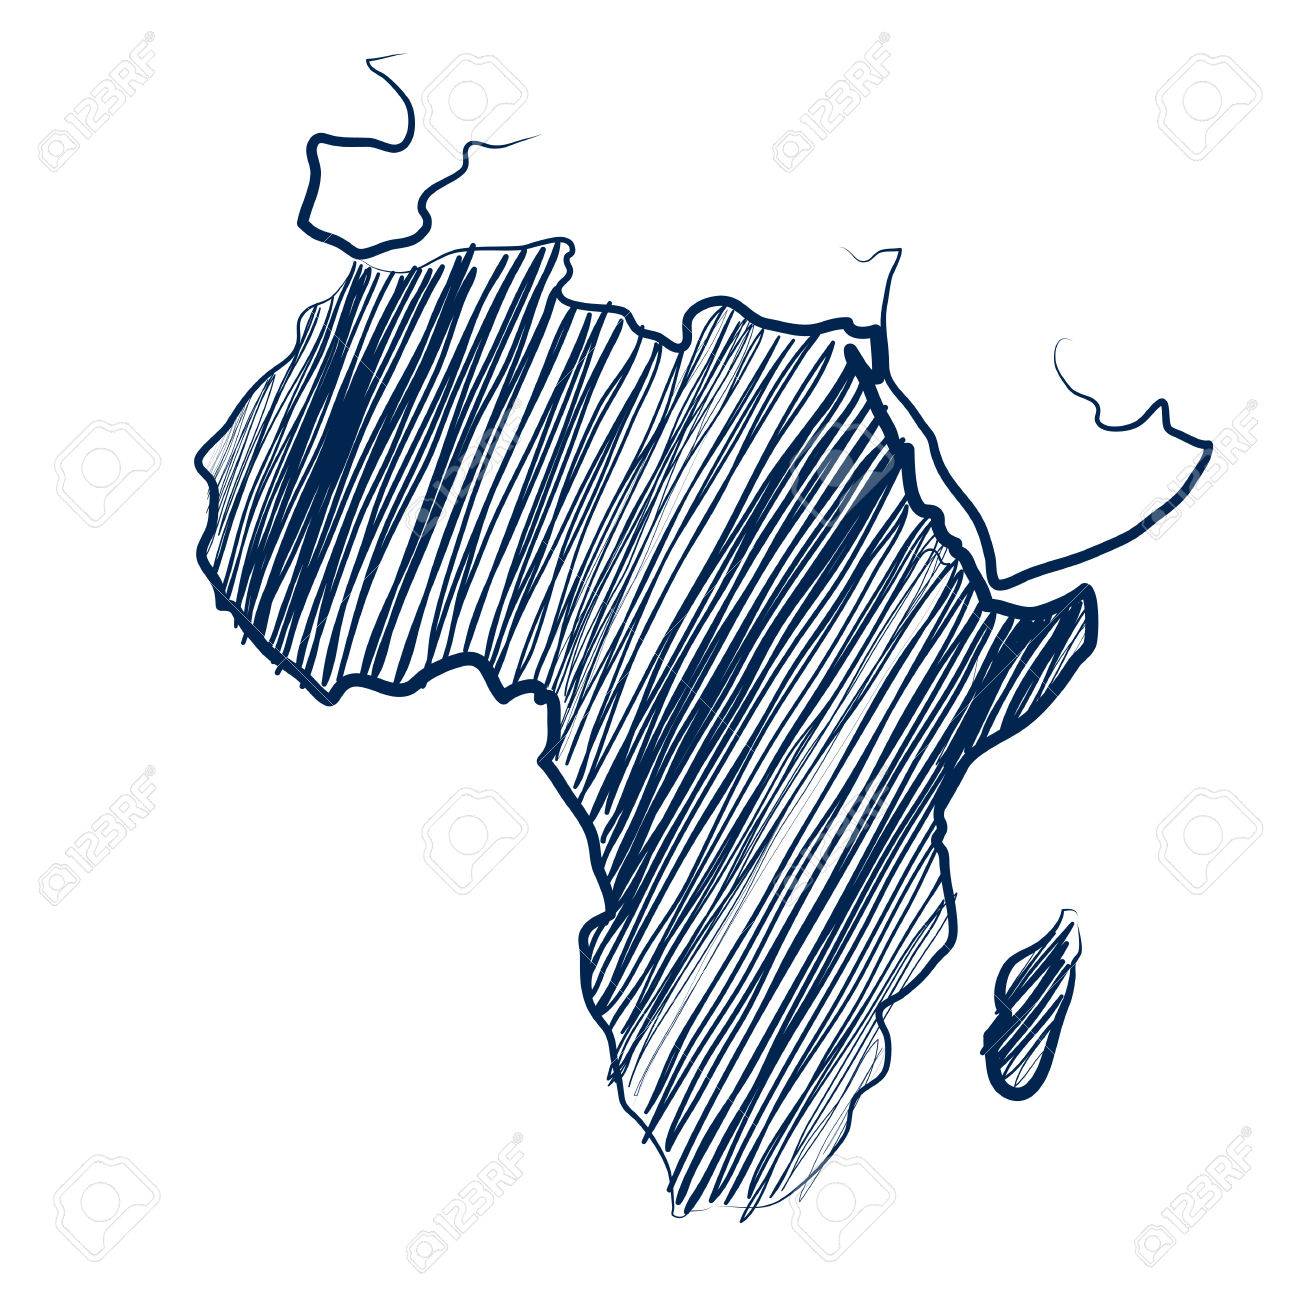 Map of drawing at. Africa clipart sketch